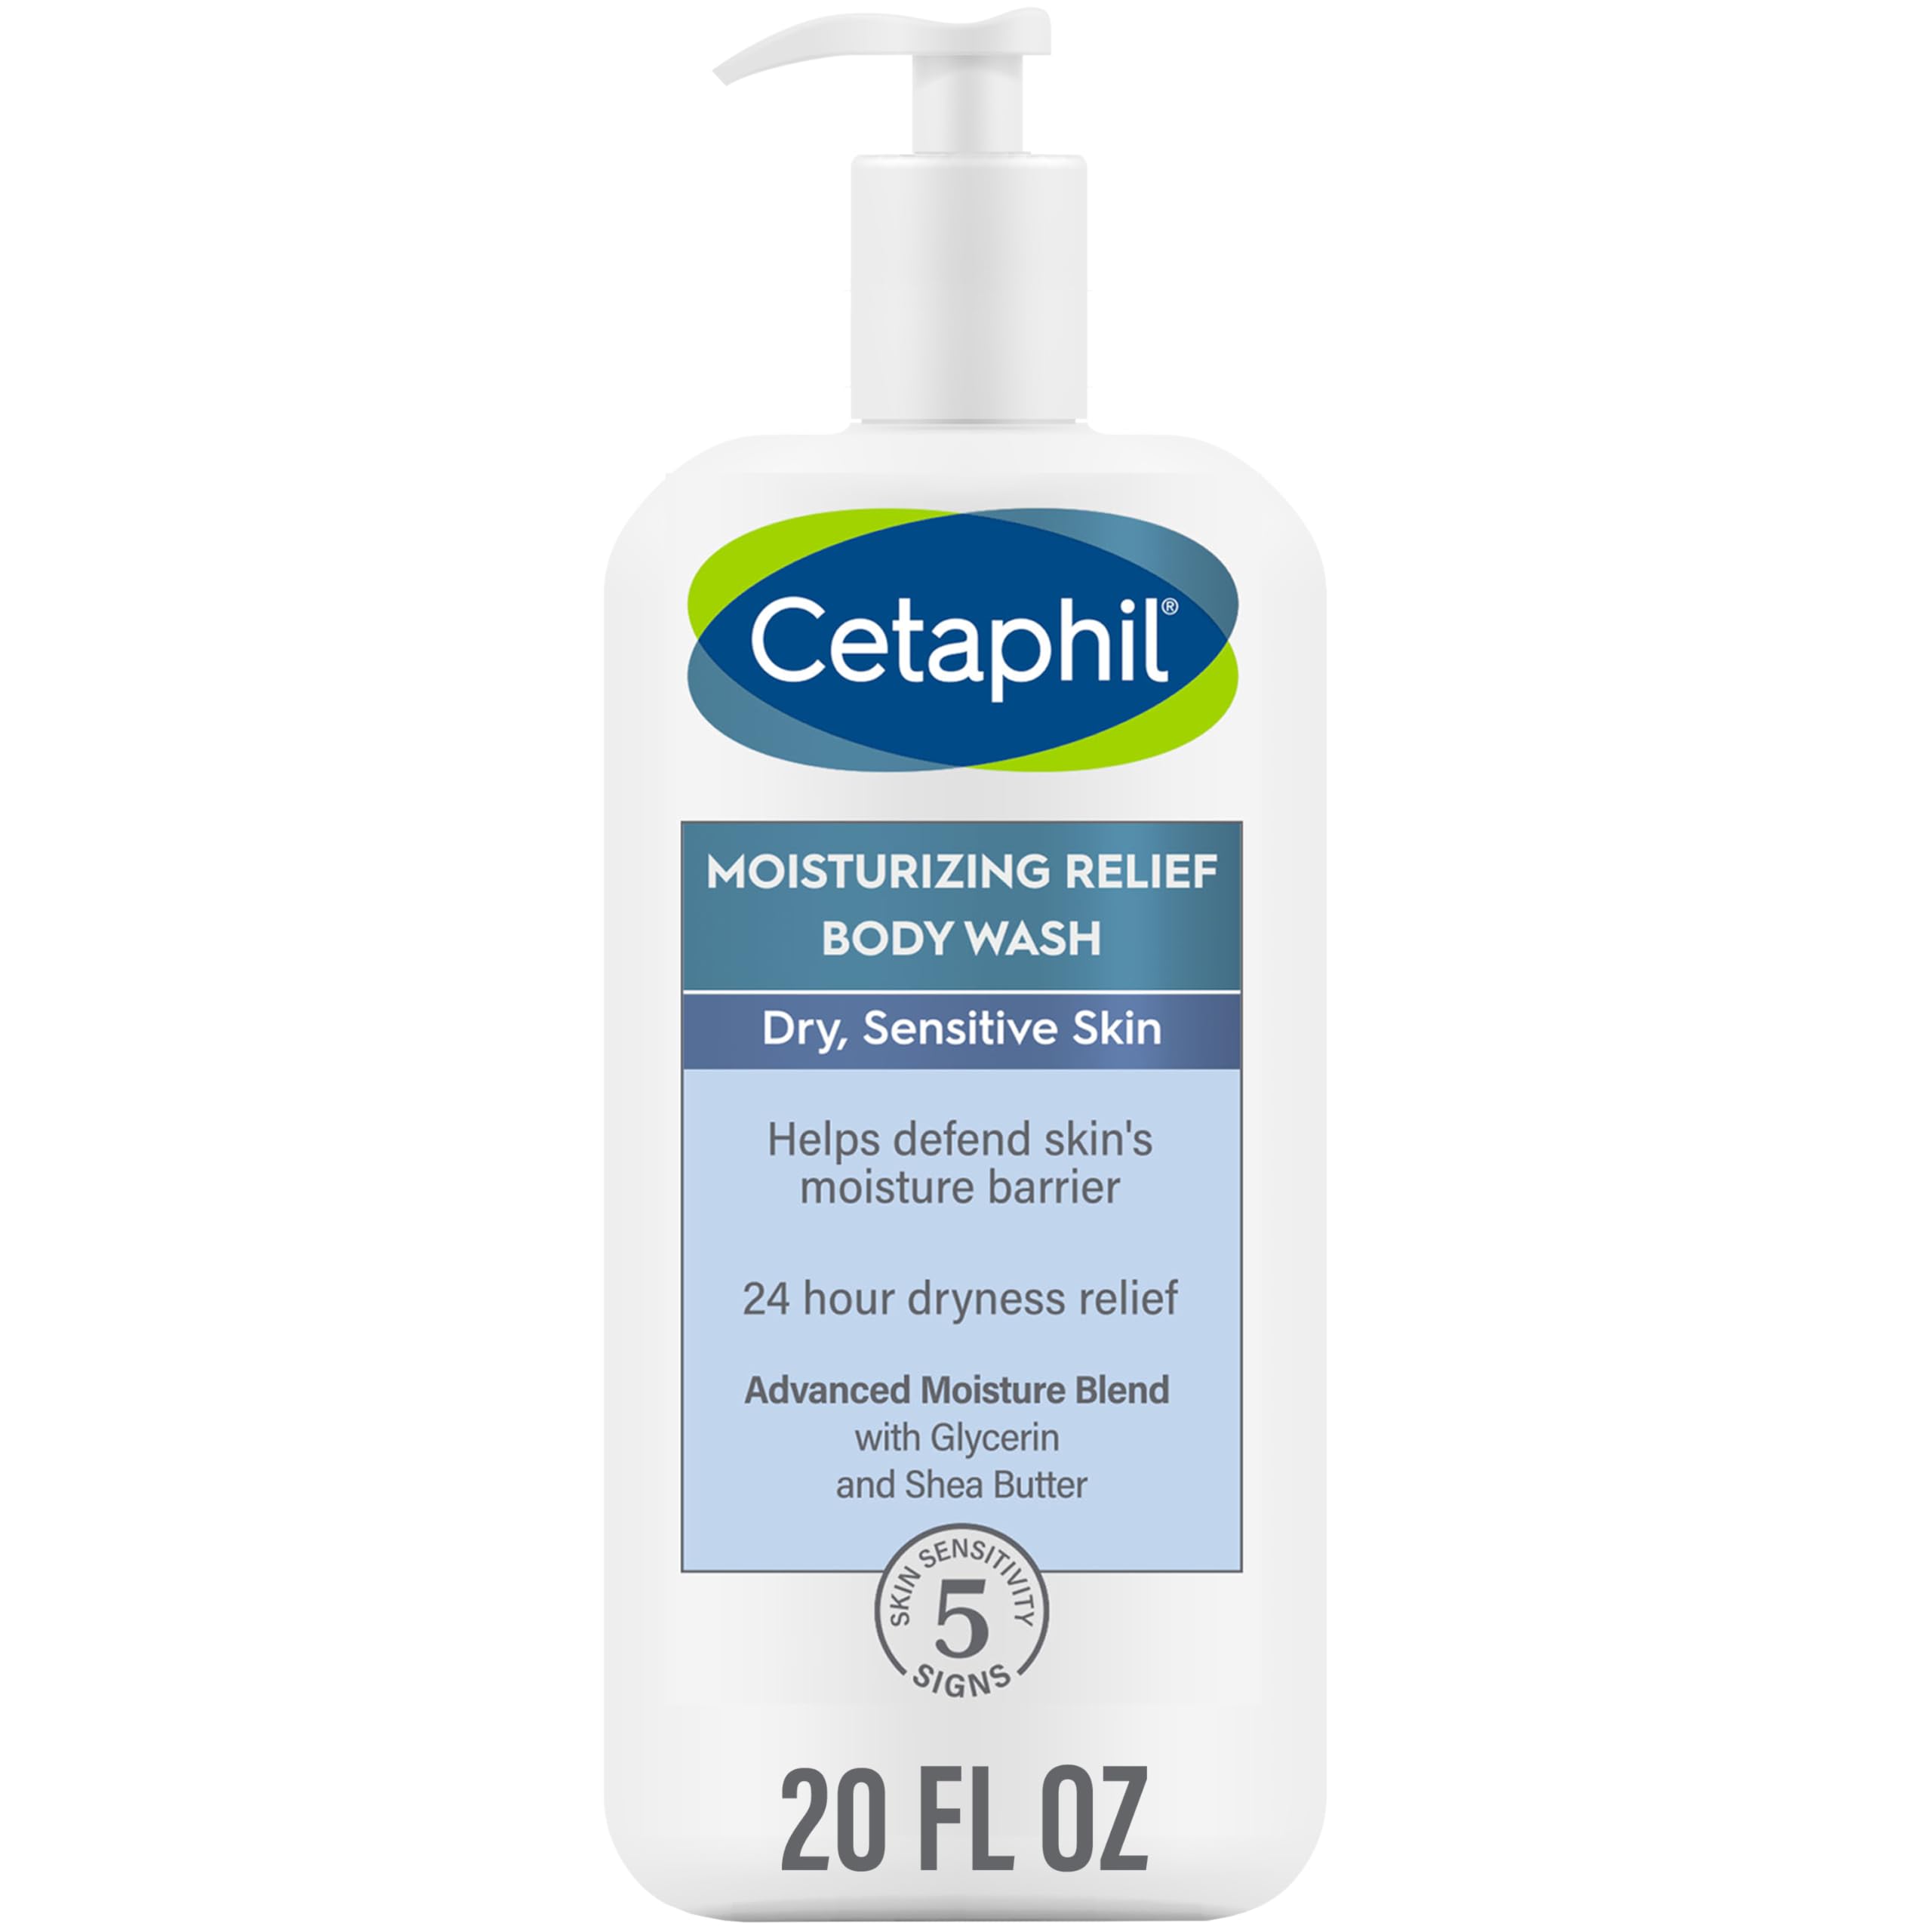 Cetaphil Body Wash, NEW Moisturizing Relief Body Wash for Sensitive Skin, Creamy Rich Formula & Ultra Gentle Refreshing Body Wash, For Dry to Normal, Sensitive Skin, 16.9oz, with Aloe Vera